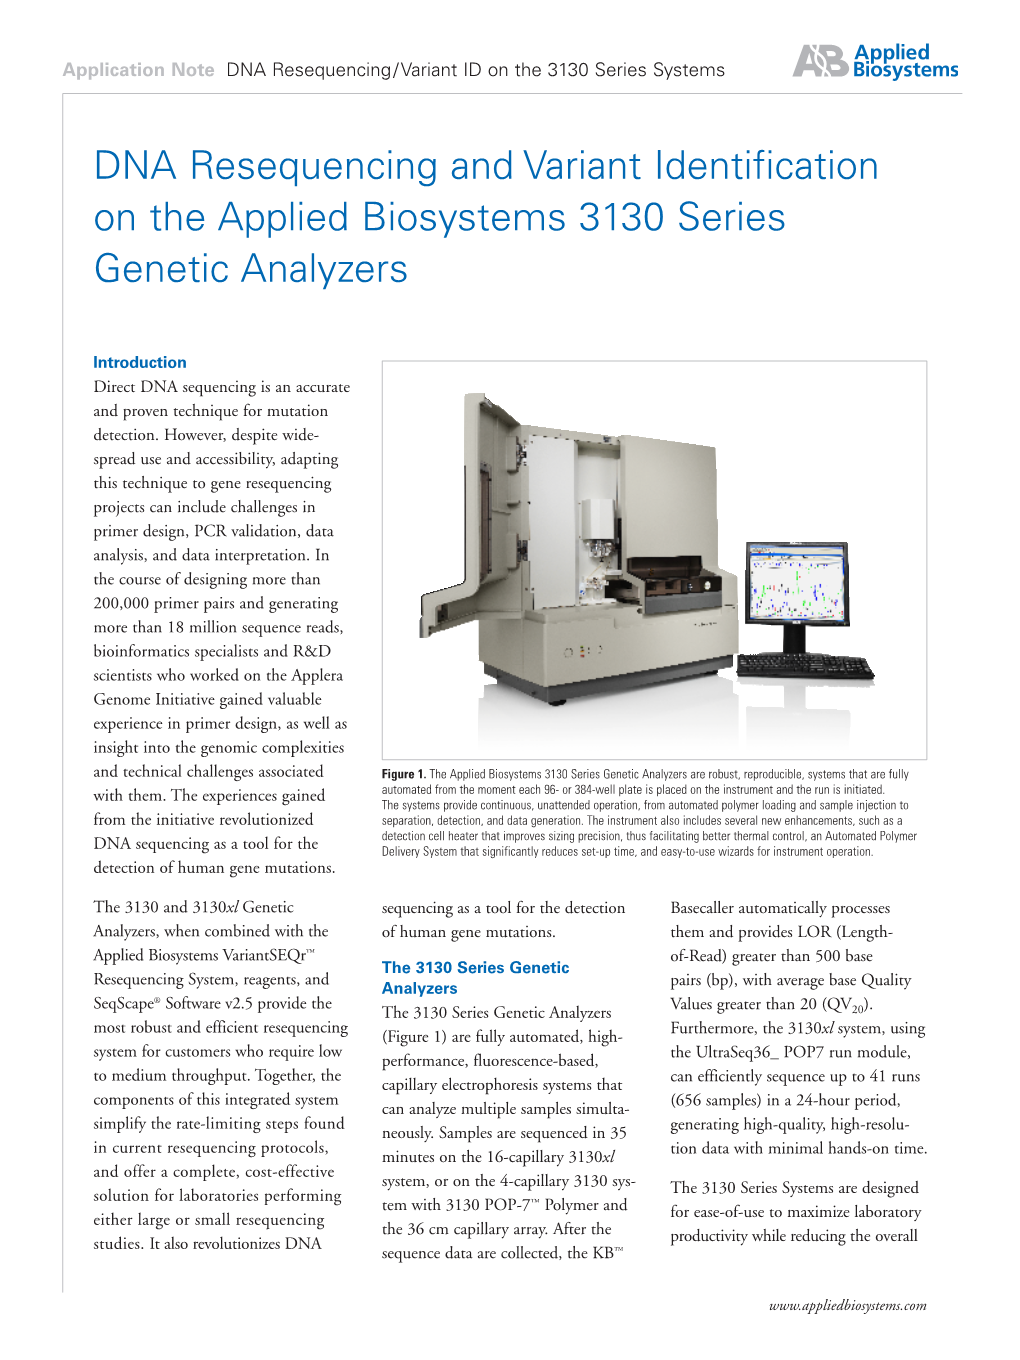 DNA Resequencing and Variant Identification on the Applied Biosystems 3130 Series Genetic Analyzers